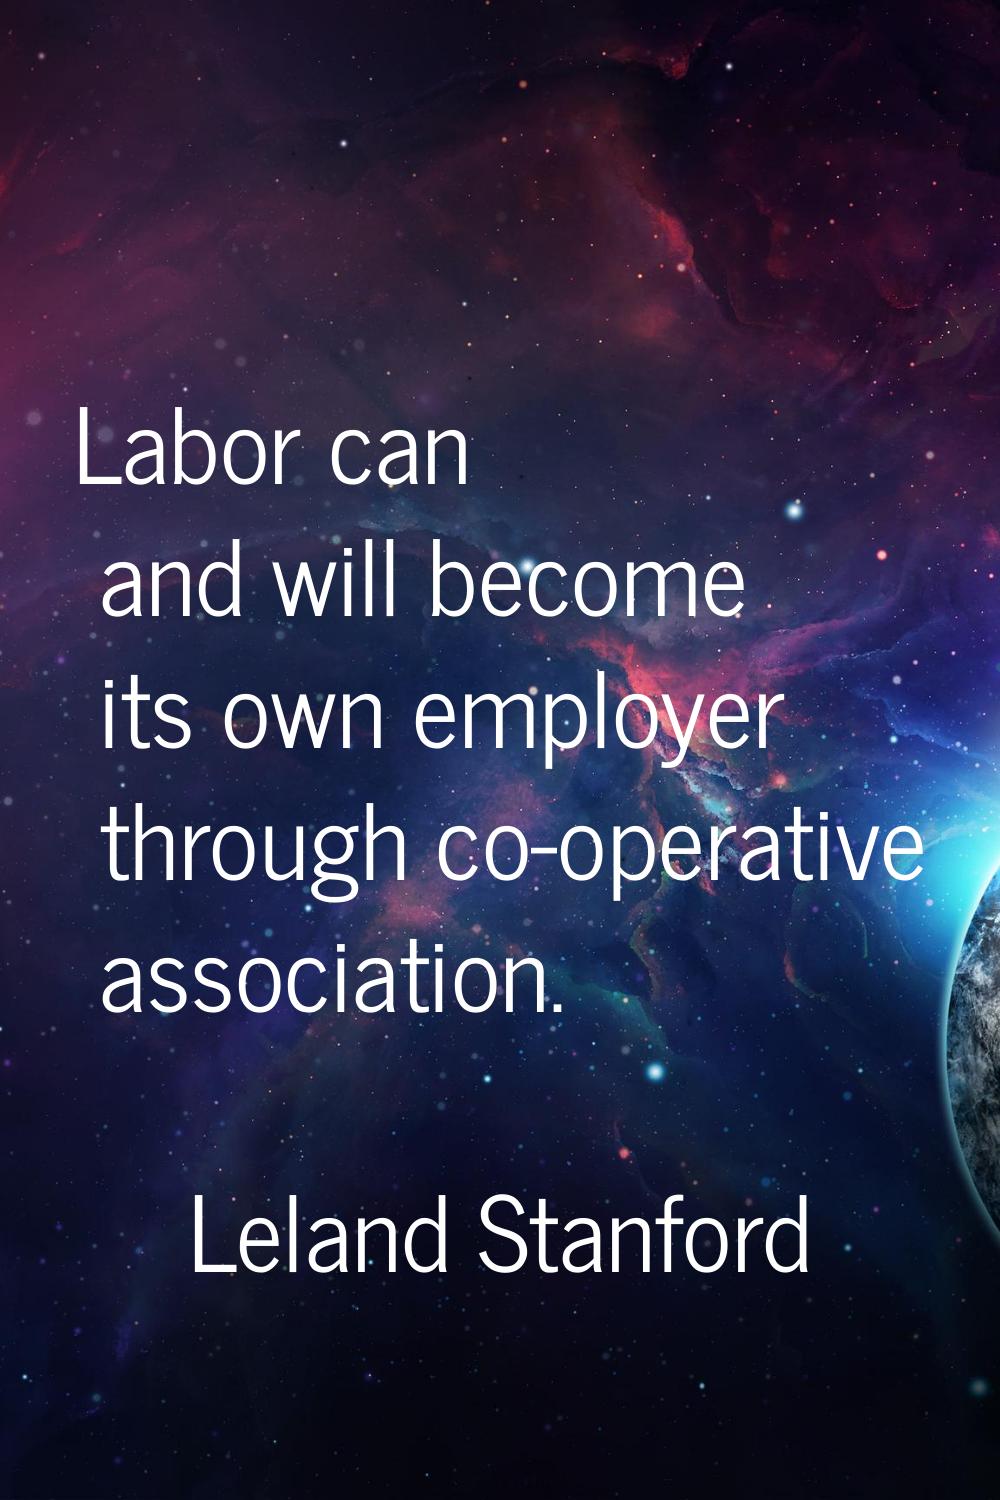 Labor can and will become its own employer through co-operative association.